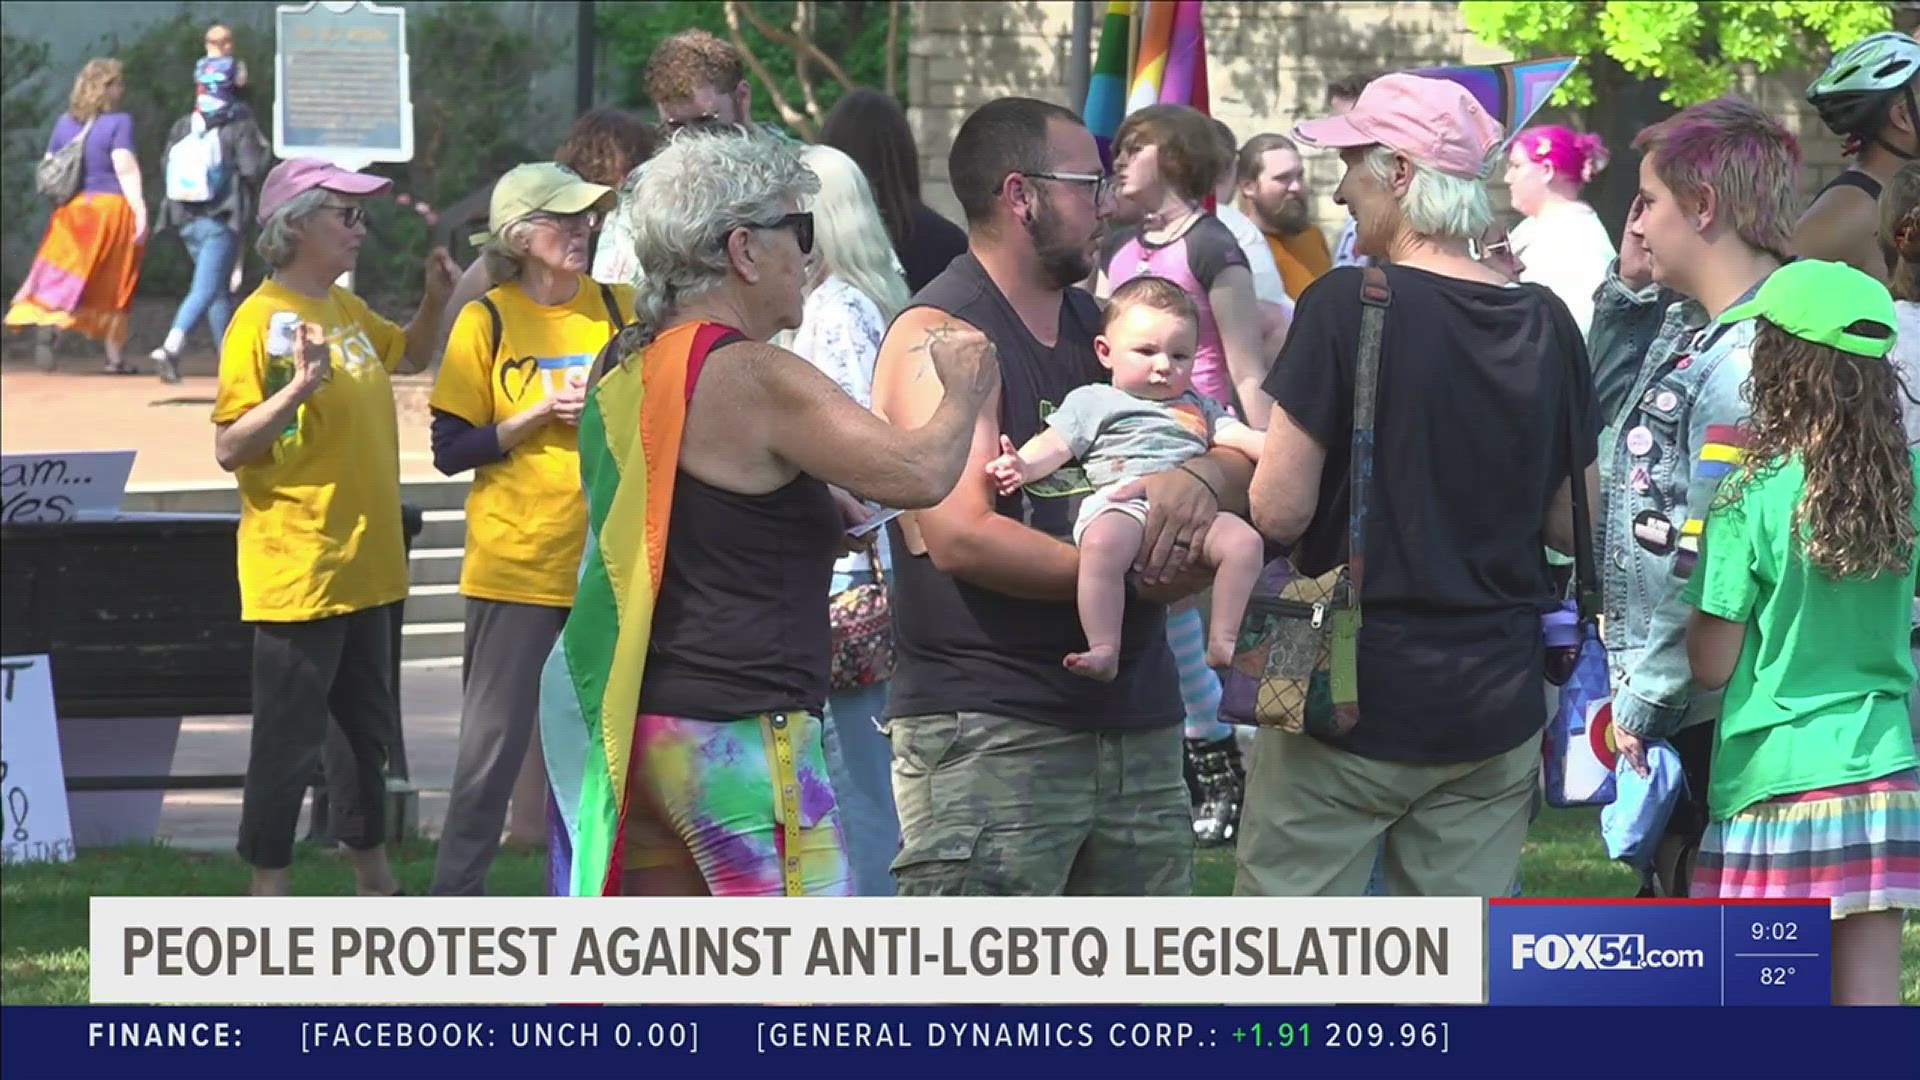 Sunday's rally comes before a further protest in Montgomery, as people ask lawmakers to withdraw bills they deem discriminatory against LGBTQ citizens in Alabama.